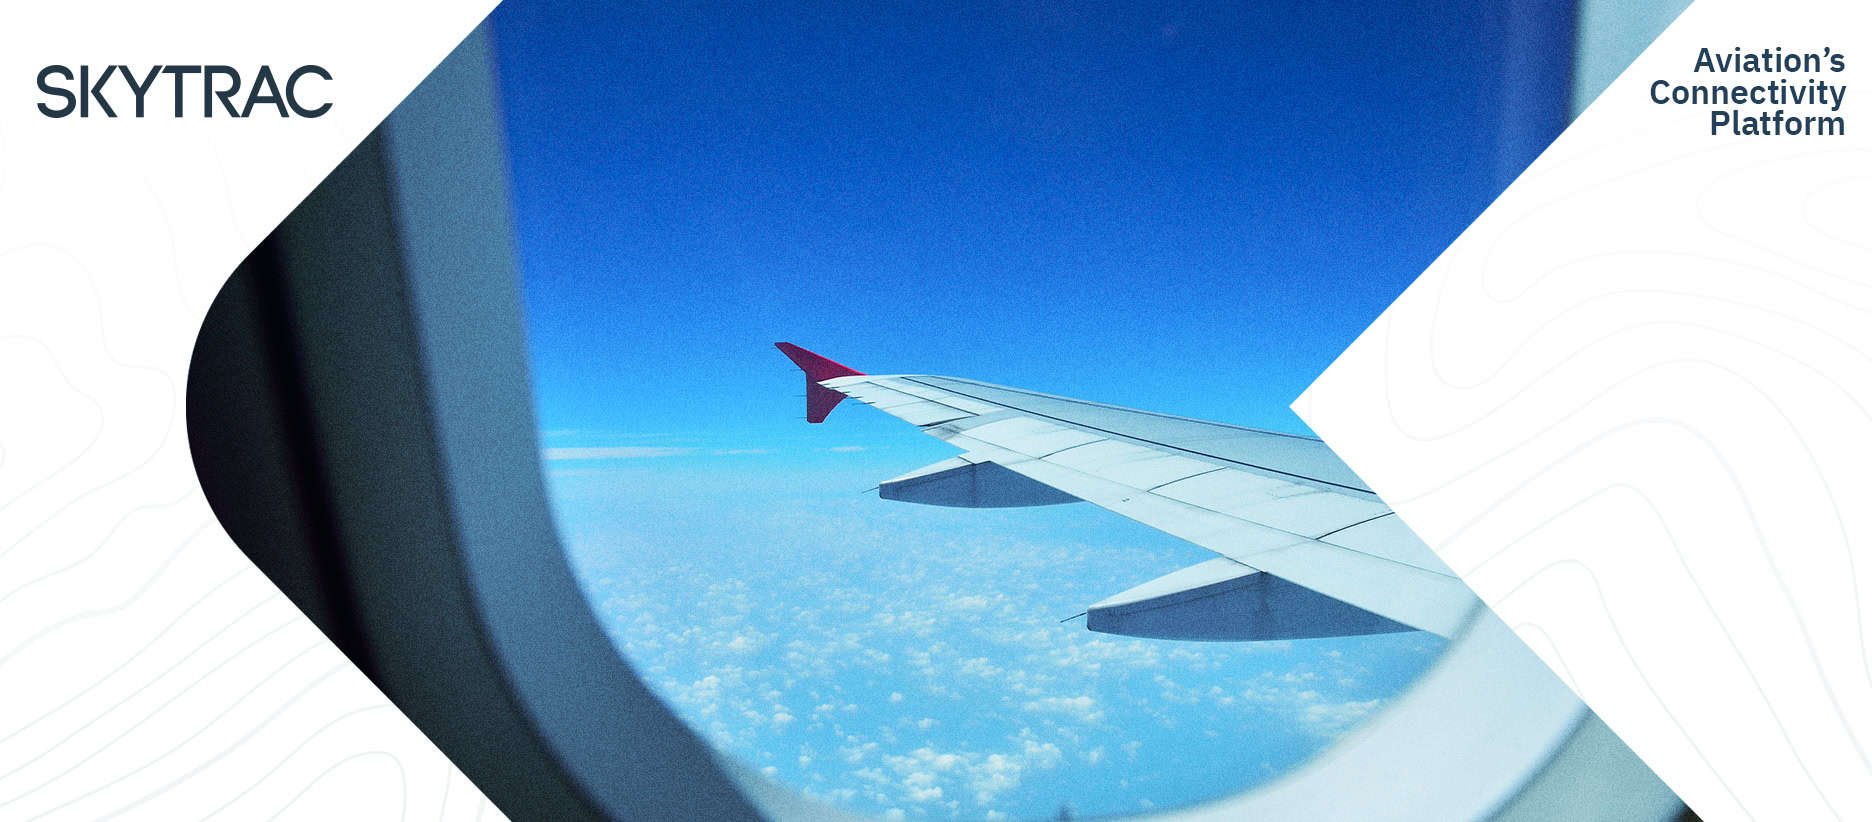 The wing of an airplane as seen through the cabin window